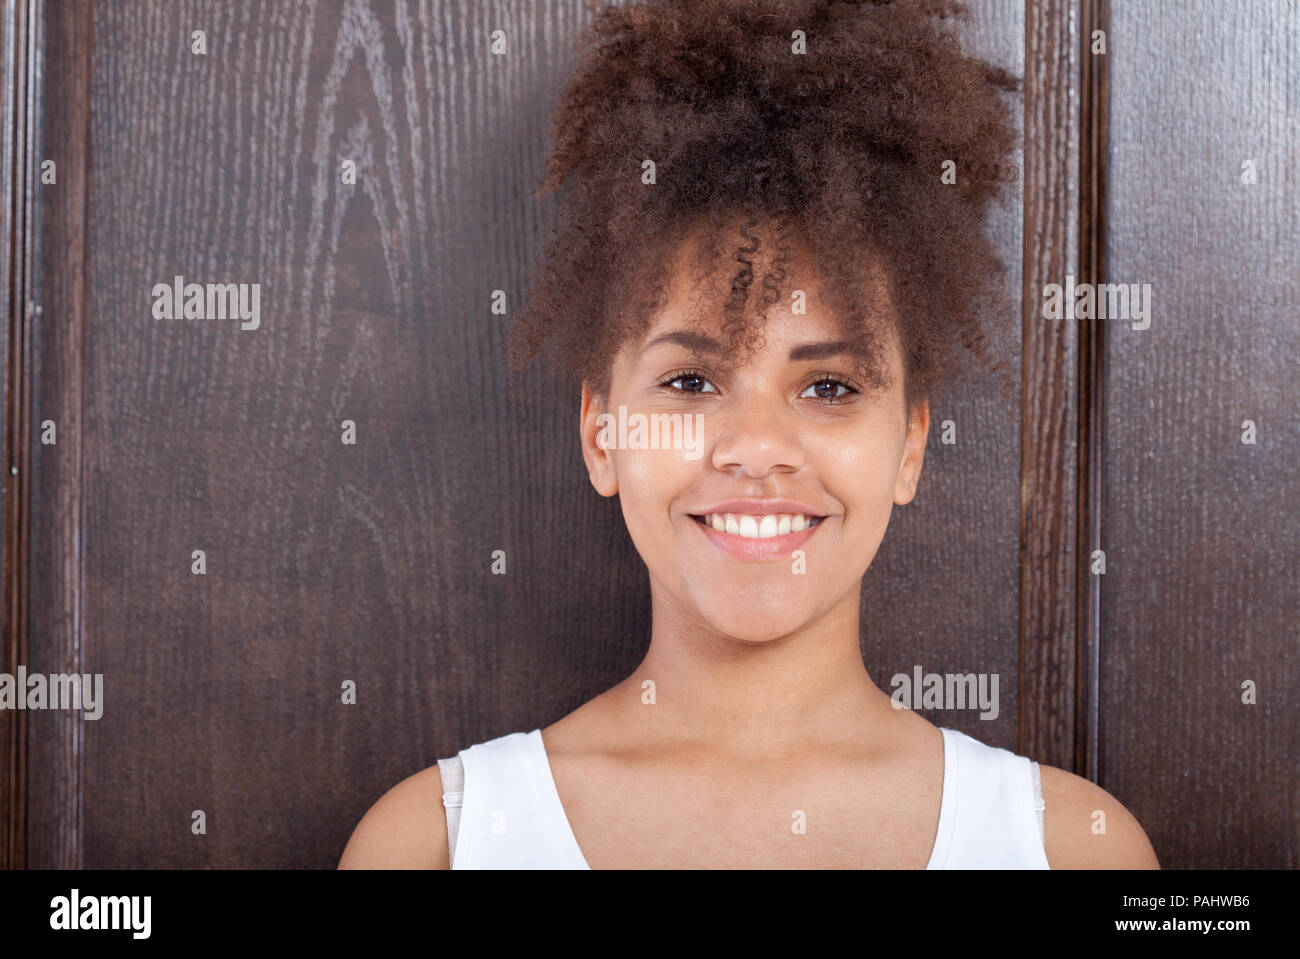 African girl teenager portrait of closeup face Stock Photo